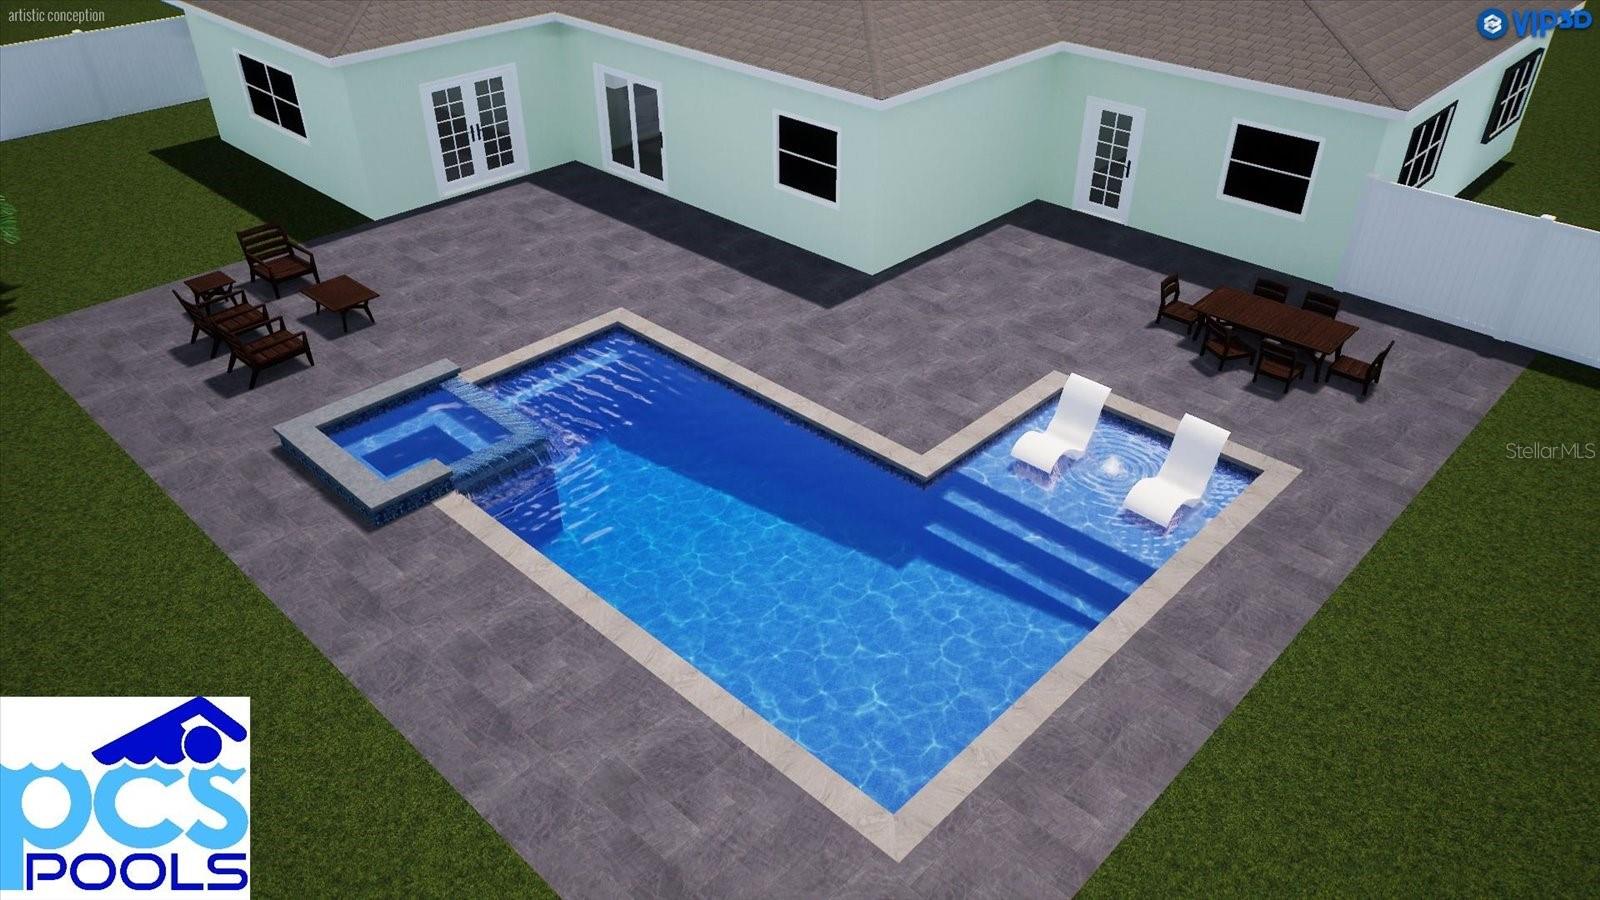 Example of Potential Pool Design